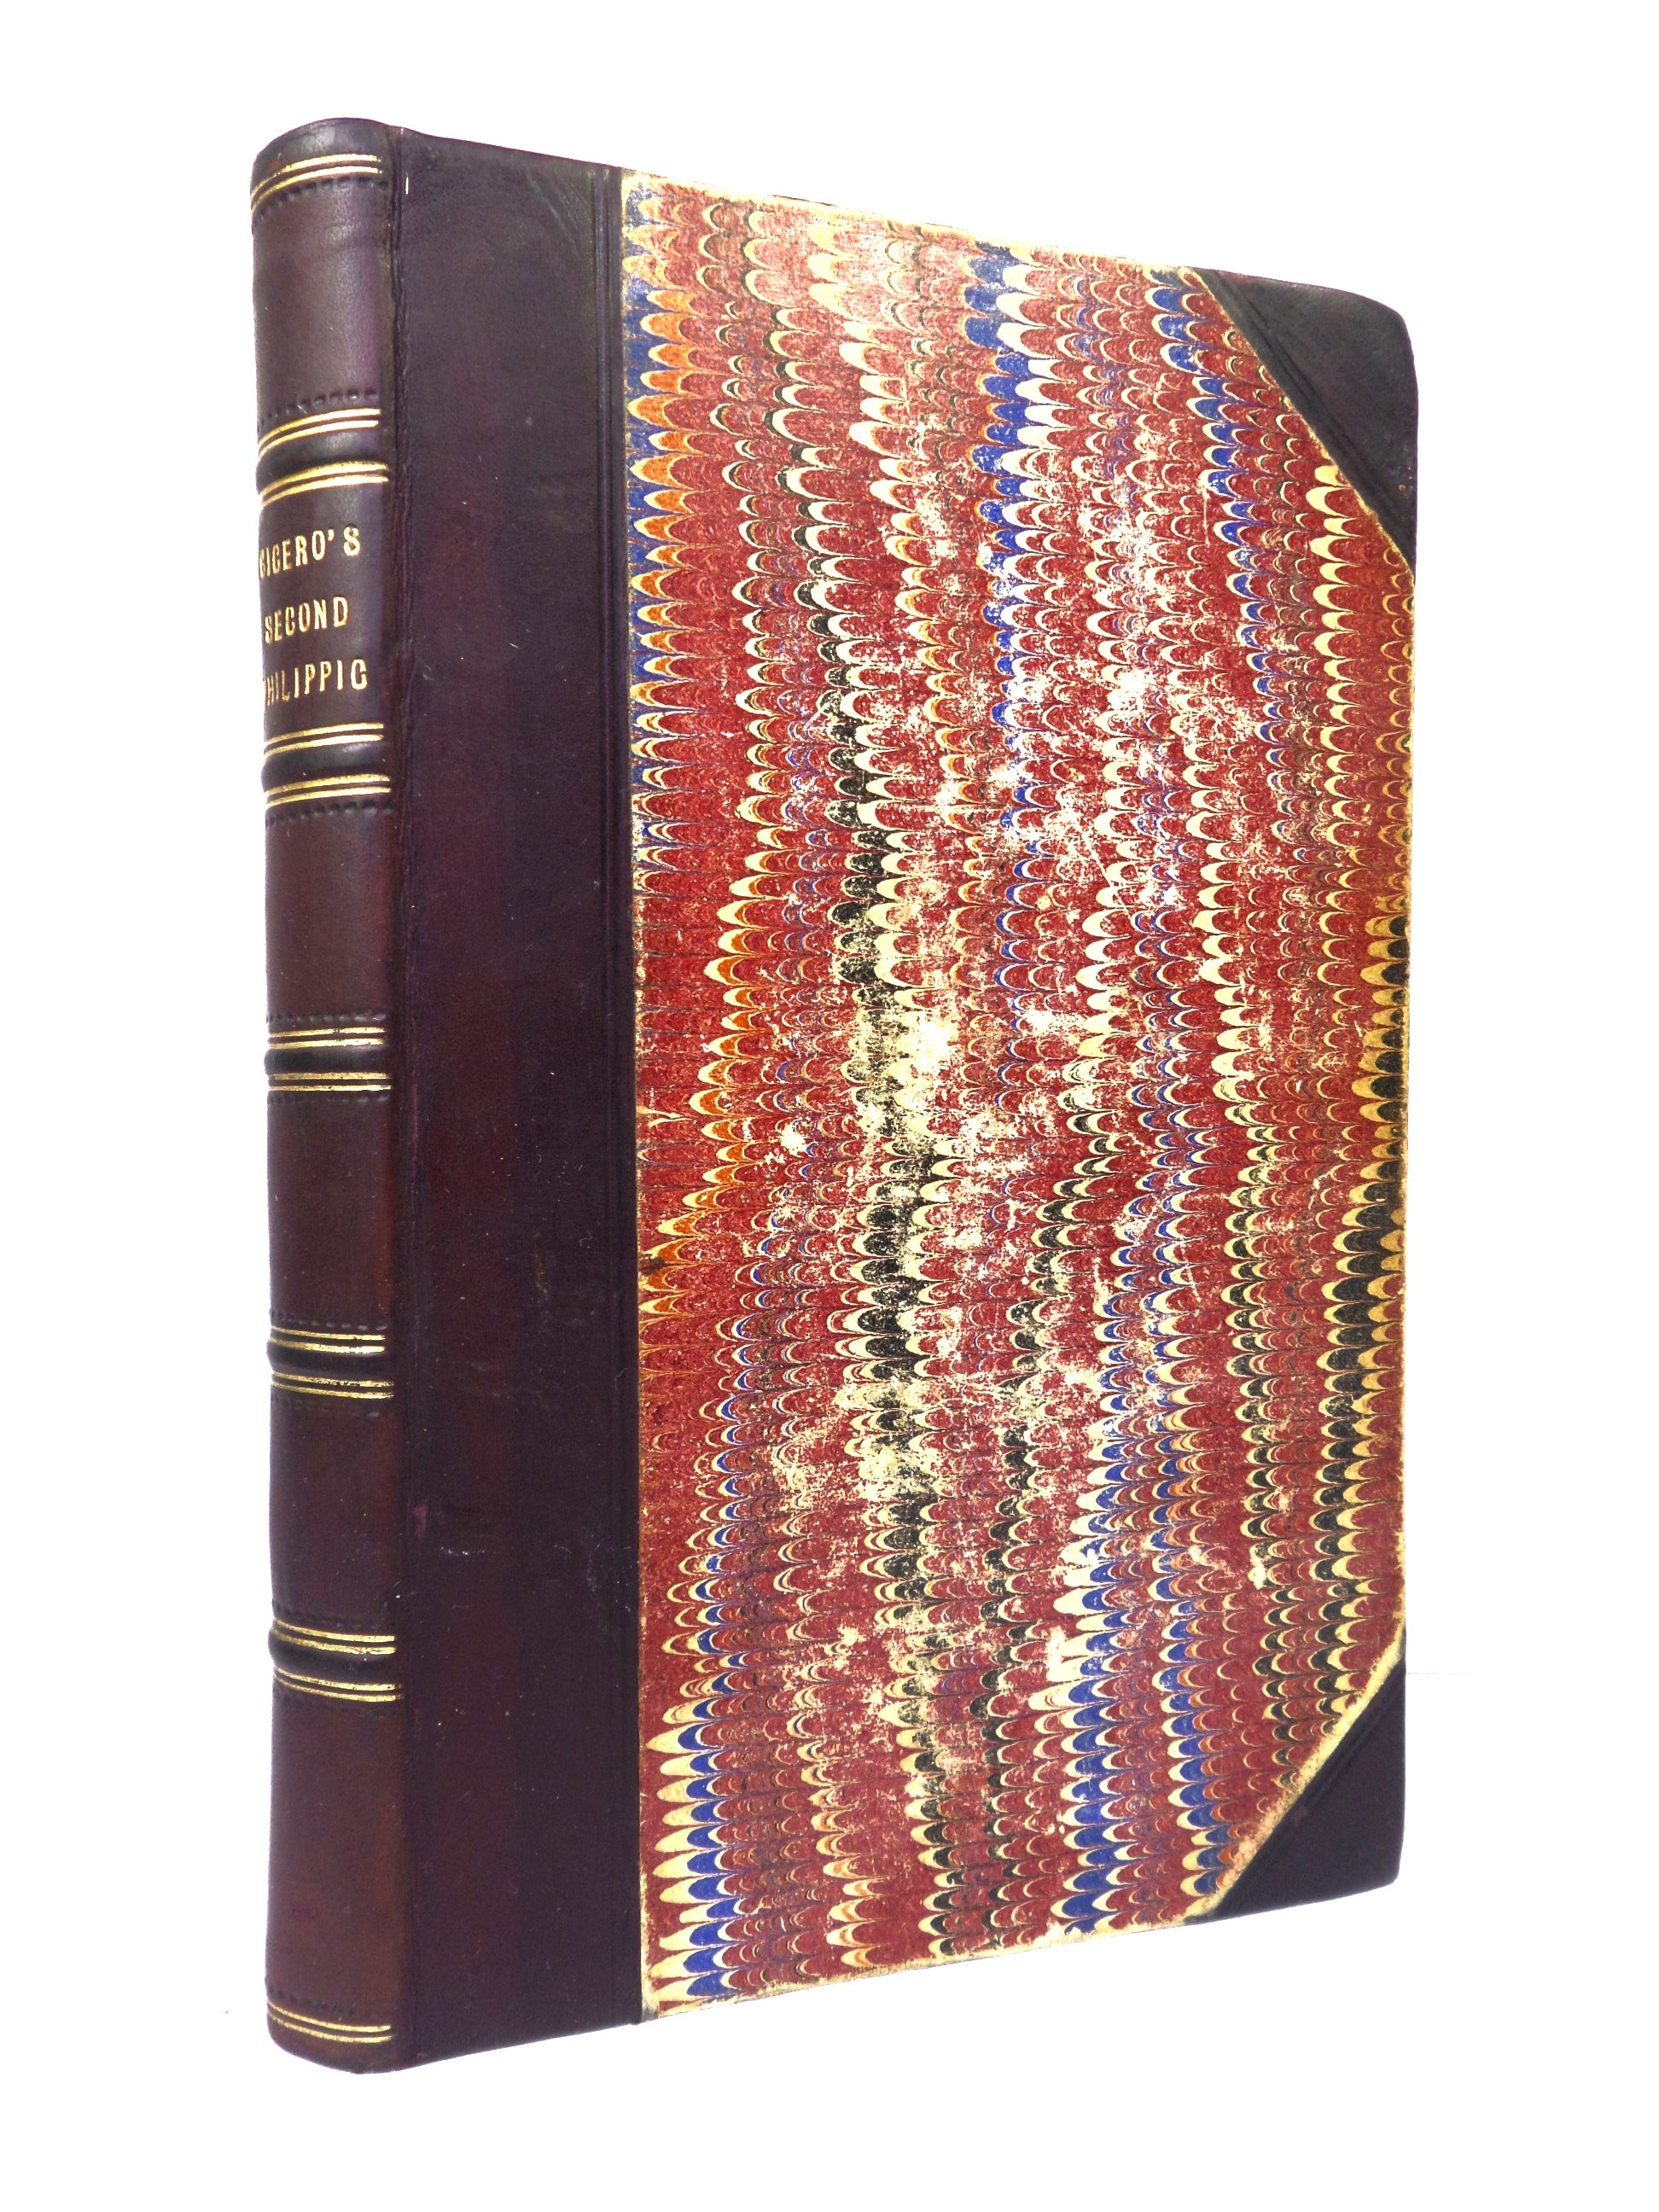 CICERO'S SECOND PHILIPPIC 1884 LEATHER BINDING